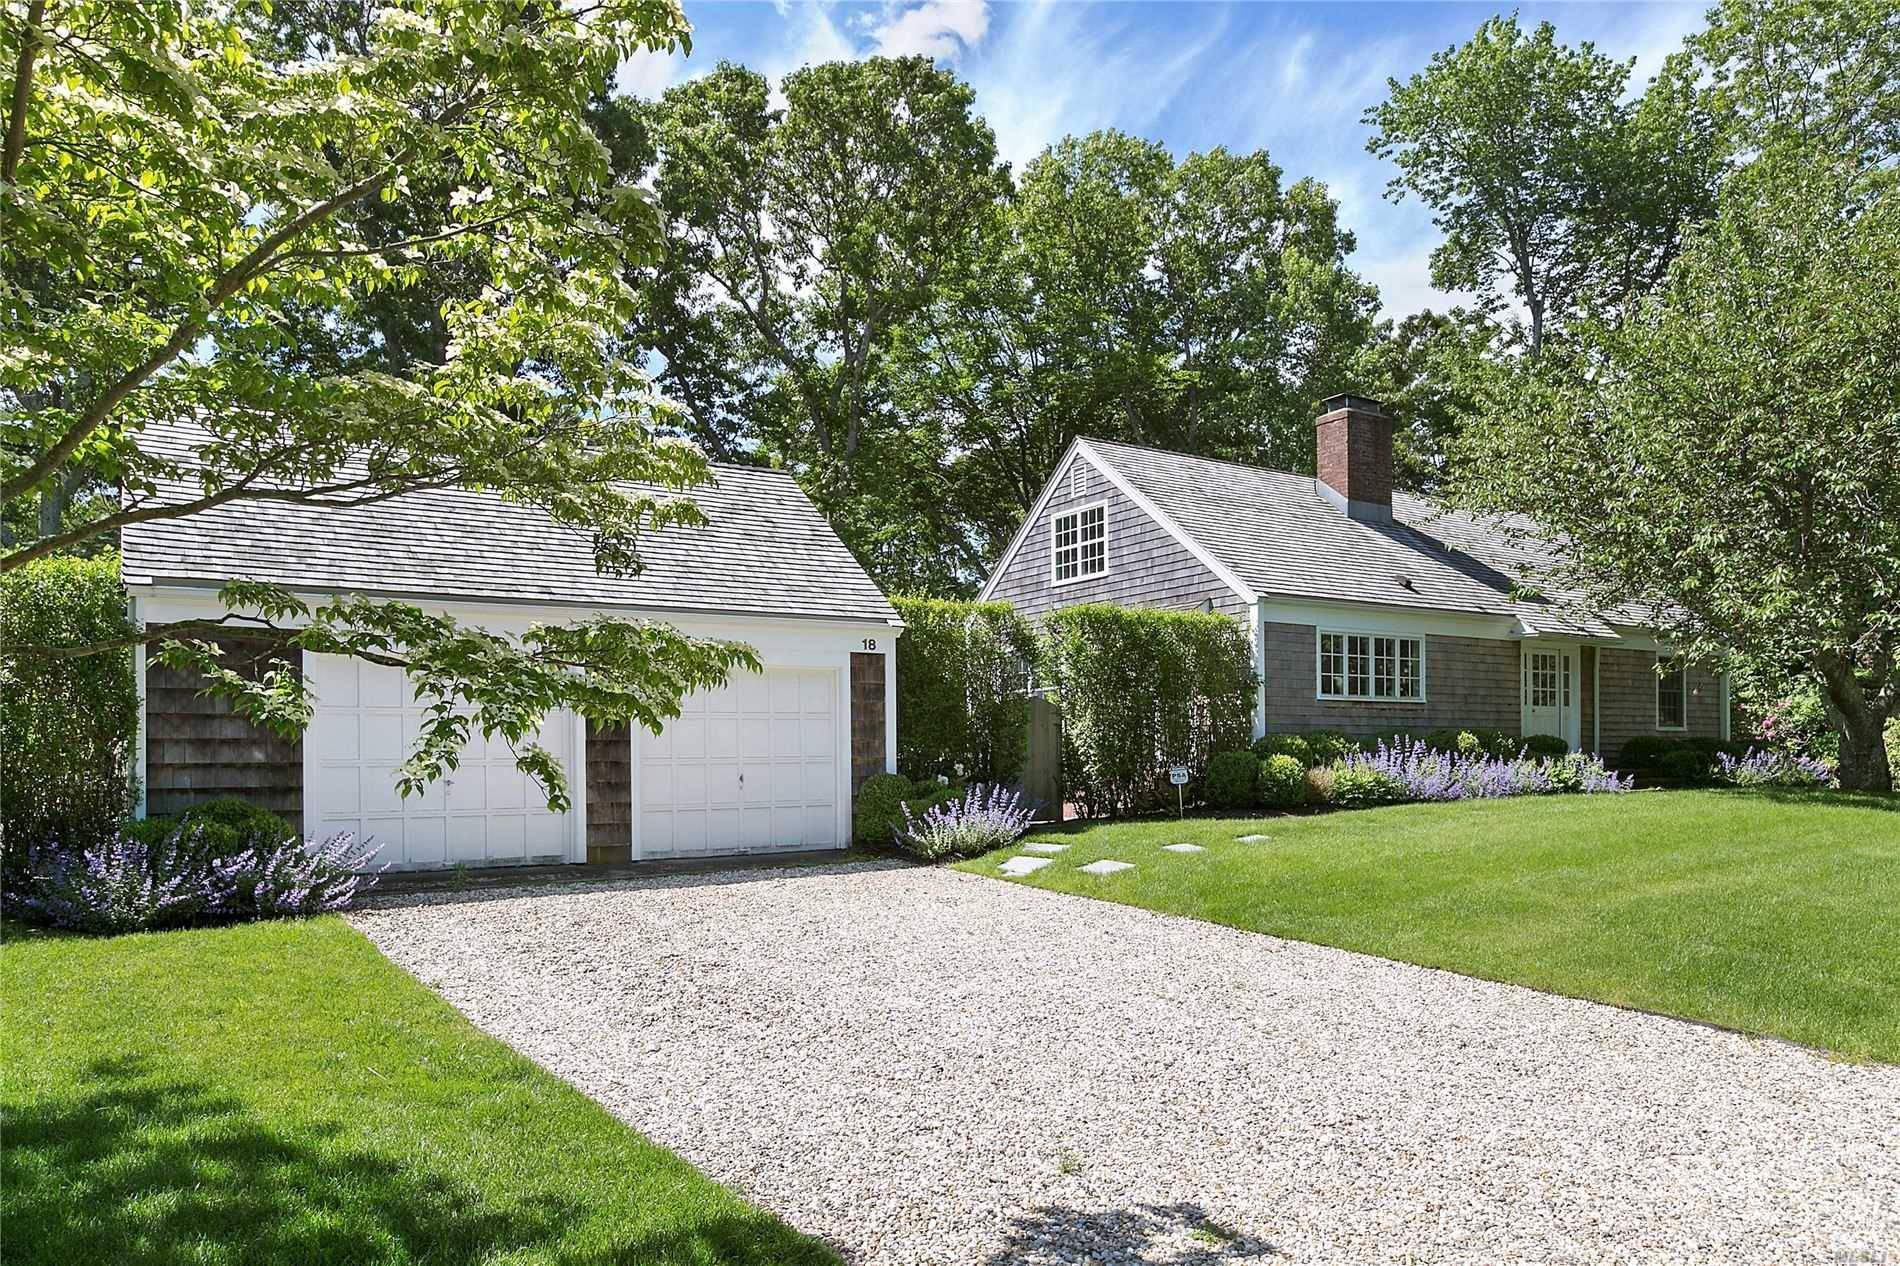 Situated in the highly desirable Redwood community of Sag Harbor Village, fully restored and exceptionally renovated four bedroom, two bath cottage boasts authentic beamed ceilings and wide planked floors.